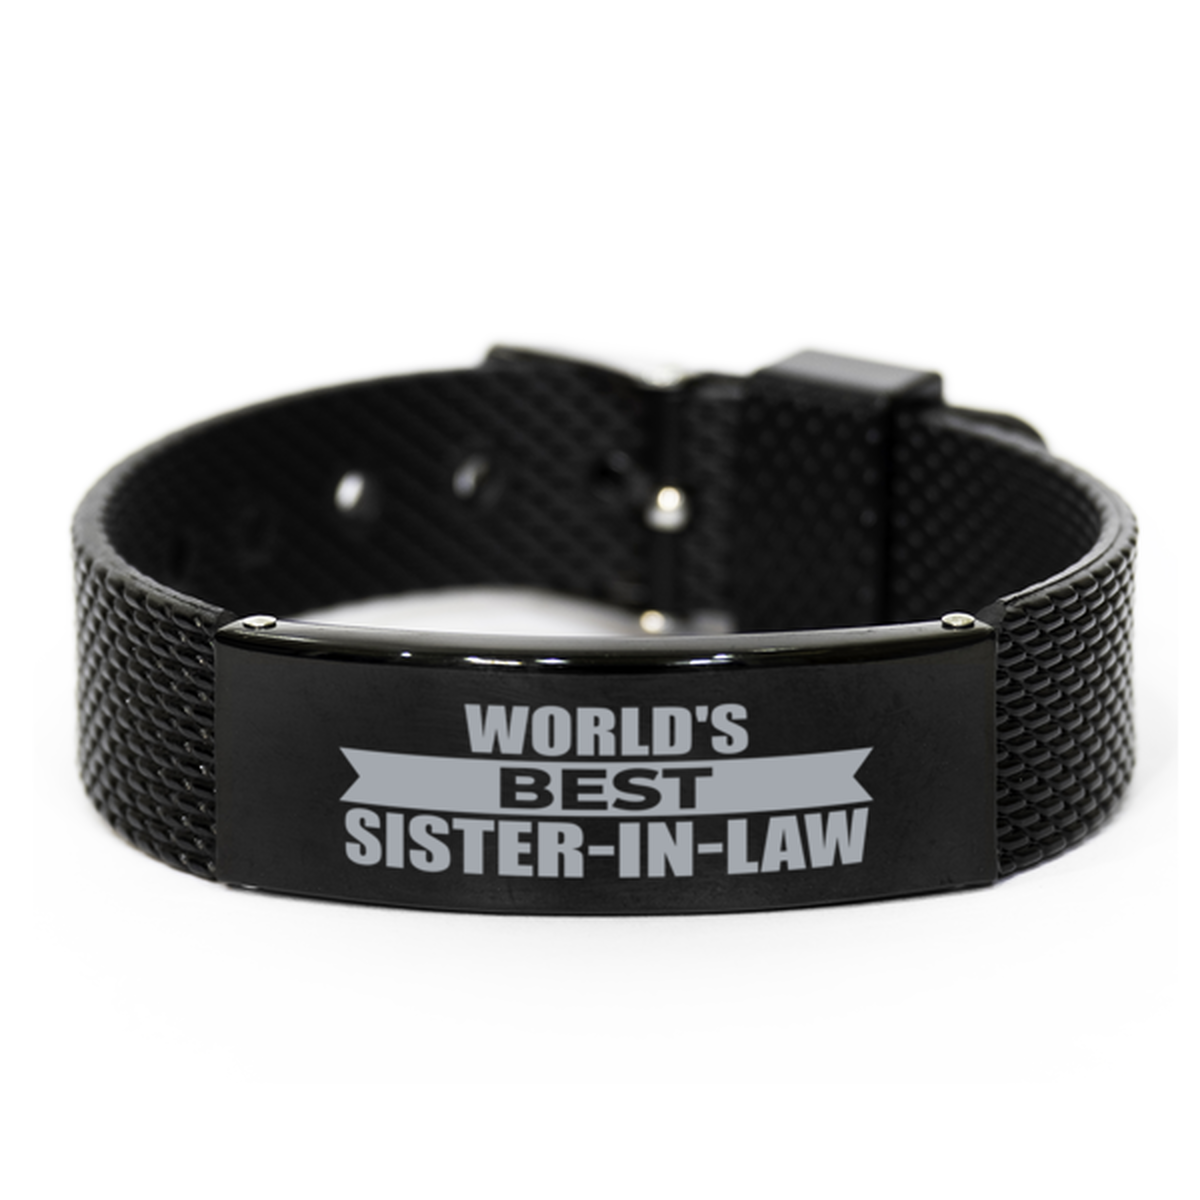 World's Best Sister-in-law Gifts, Gag Engraved Bracelet For Sister-in-law, Best Family Gifts For Women